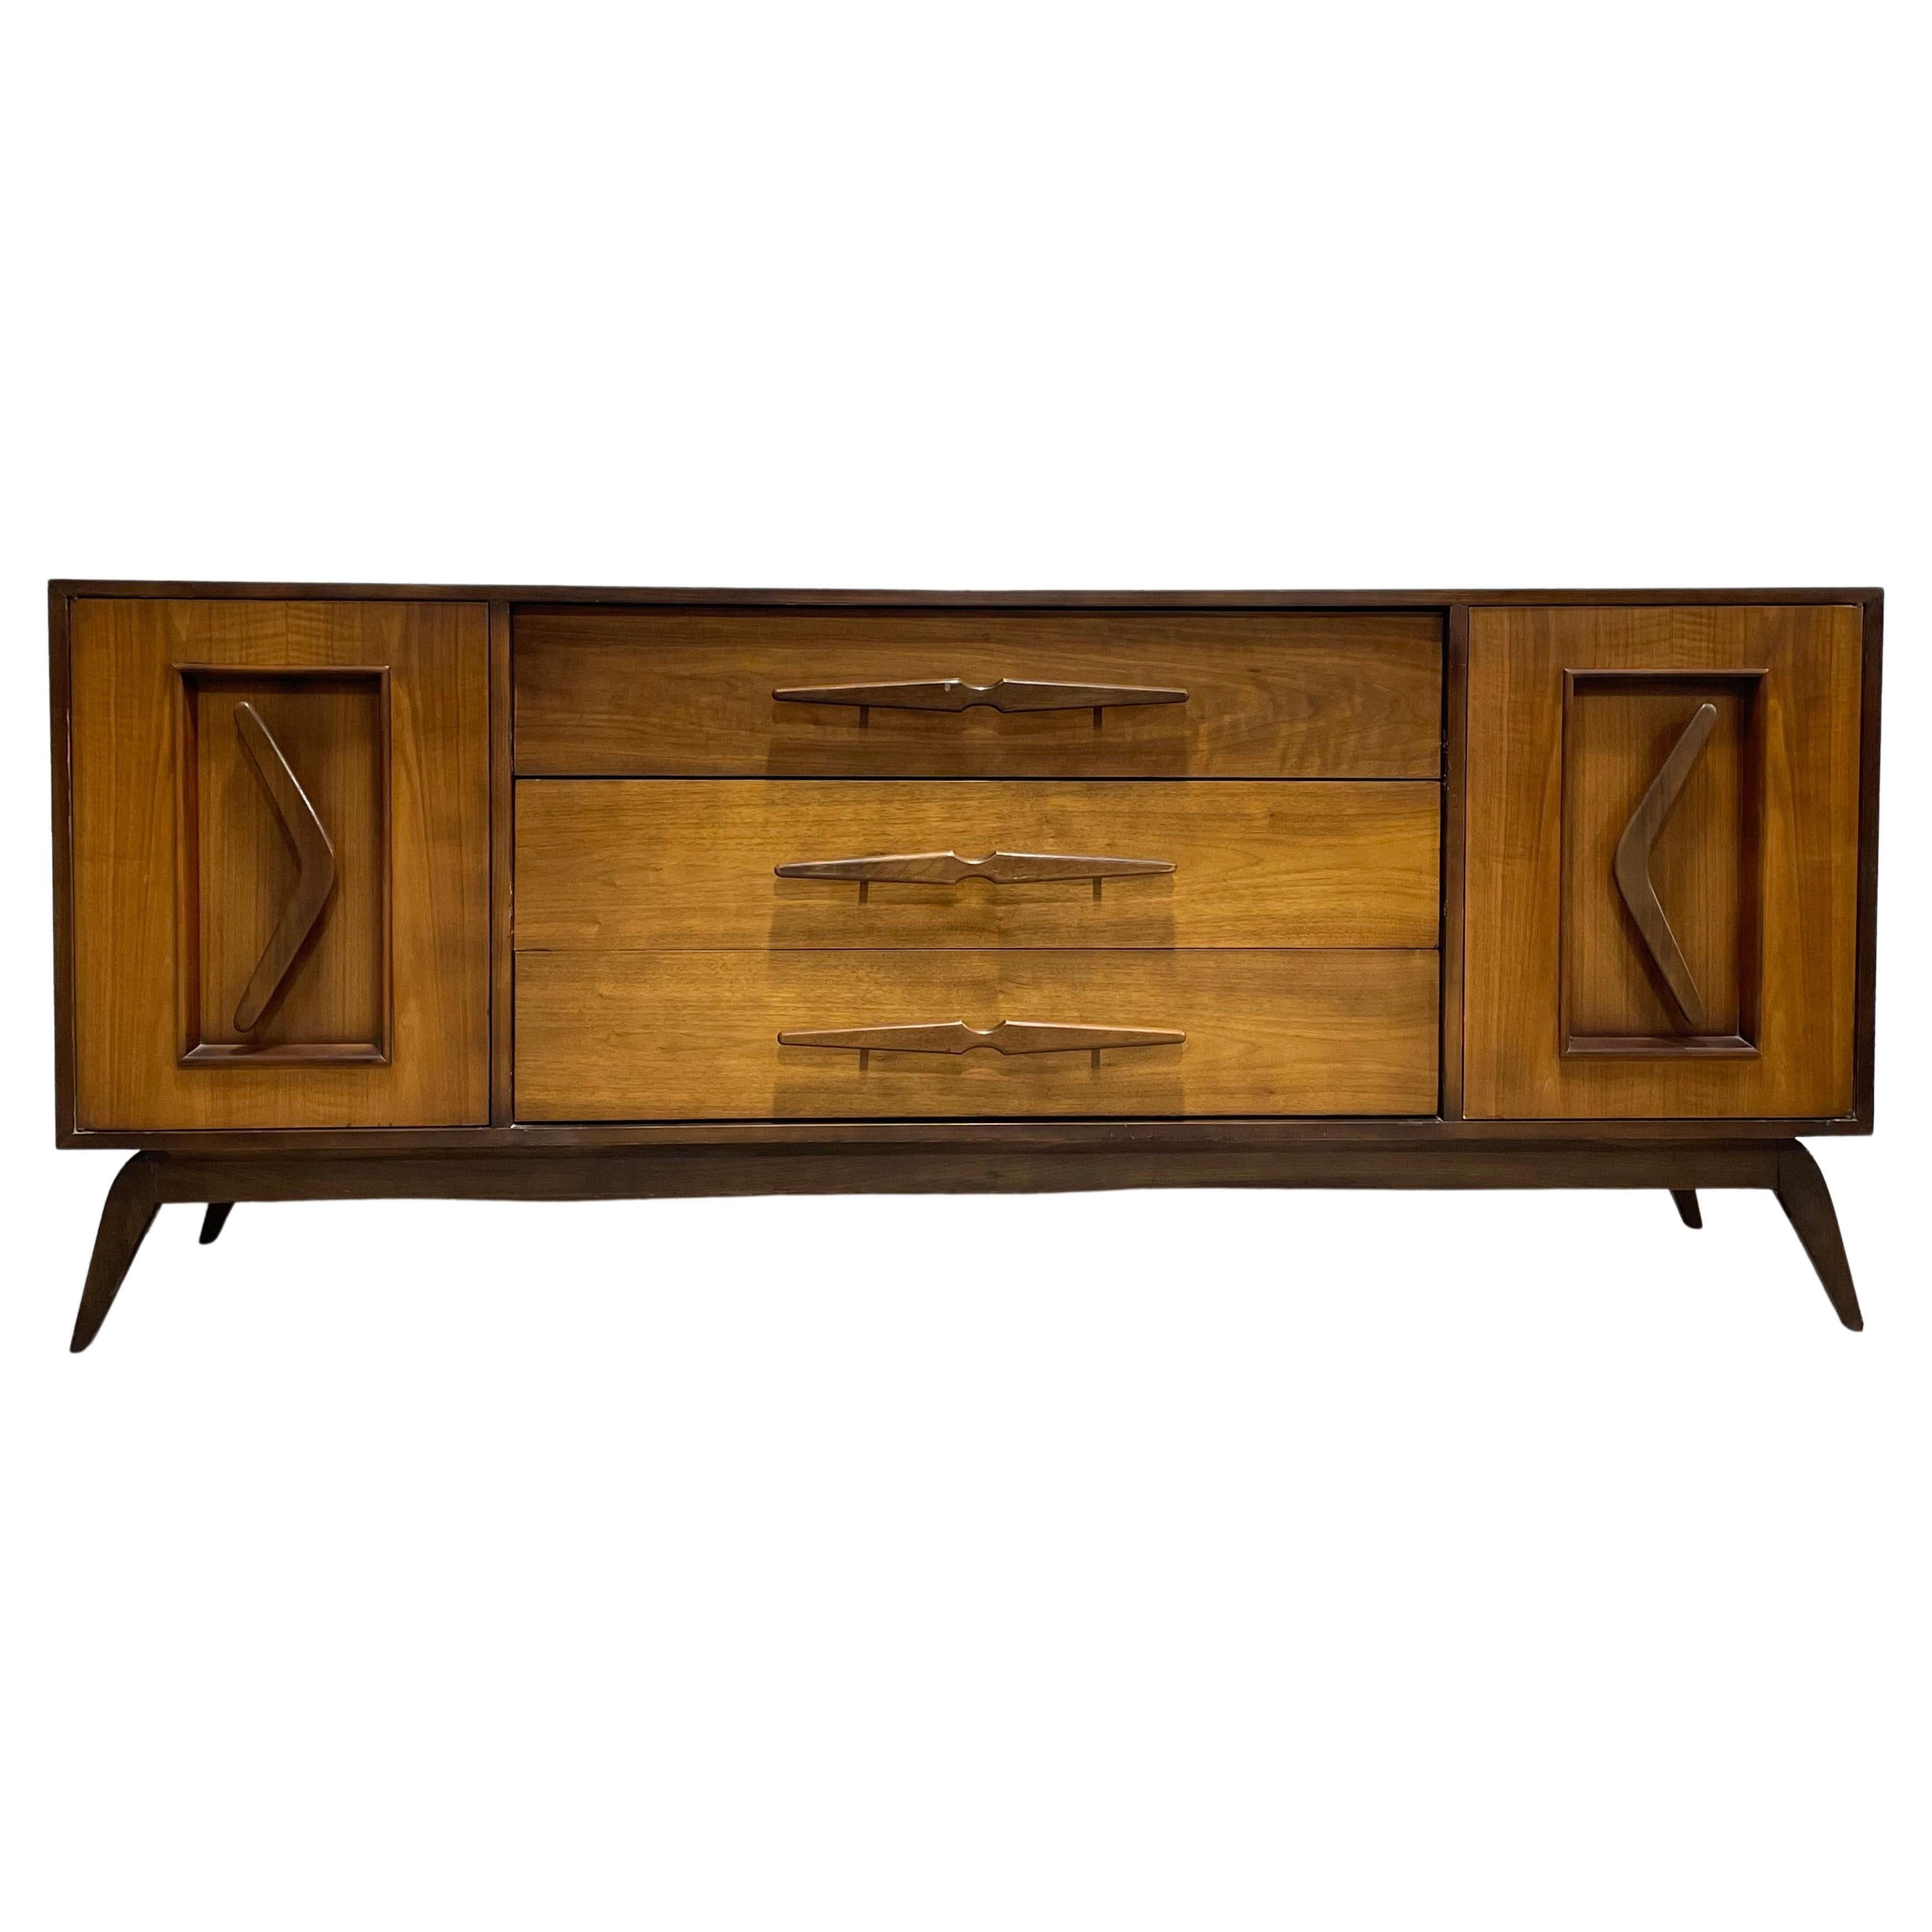 Mid Century Modern Long Dresser / Sideboard with boomerang hand-pulls along the side cabinet doors, sculpted center pulls and splayed legs along the solid base. The dresser offers loads of storage space - a total of SIX deep and spacious drawers -